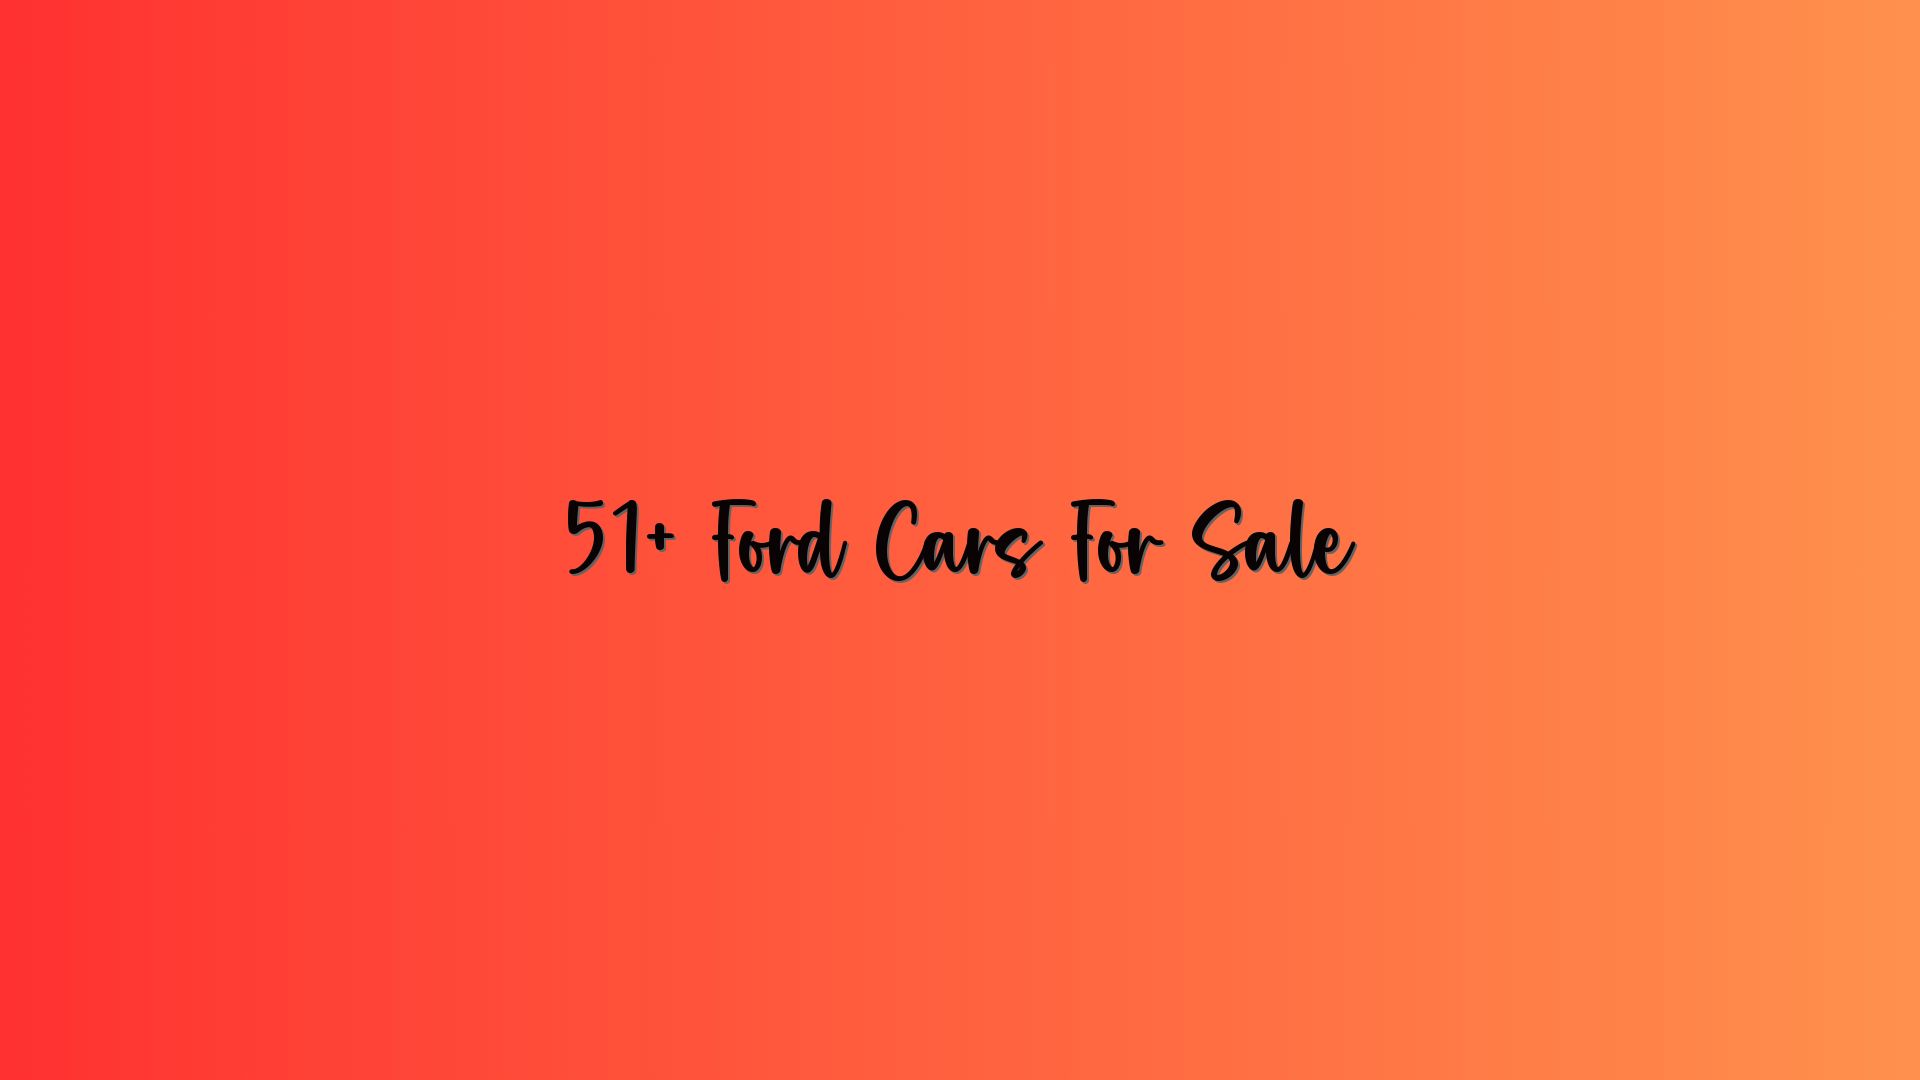 51+ Ford Cars For Sale